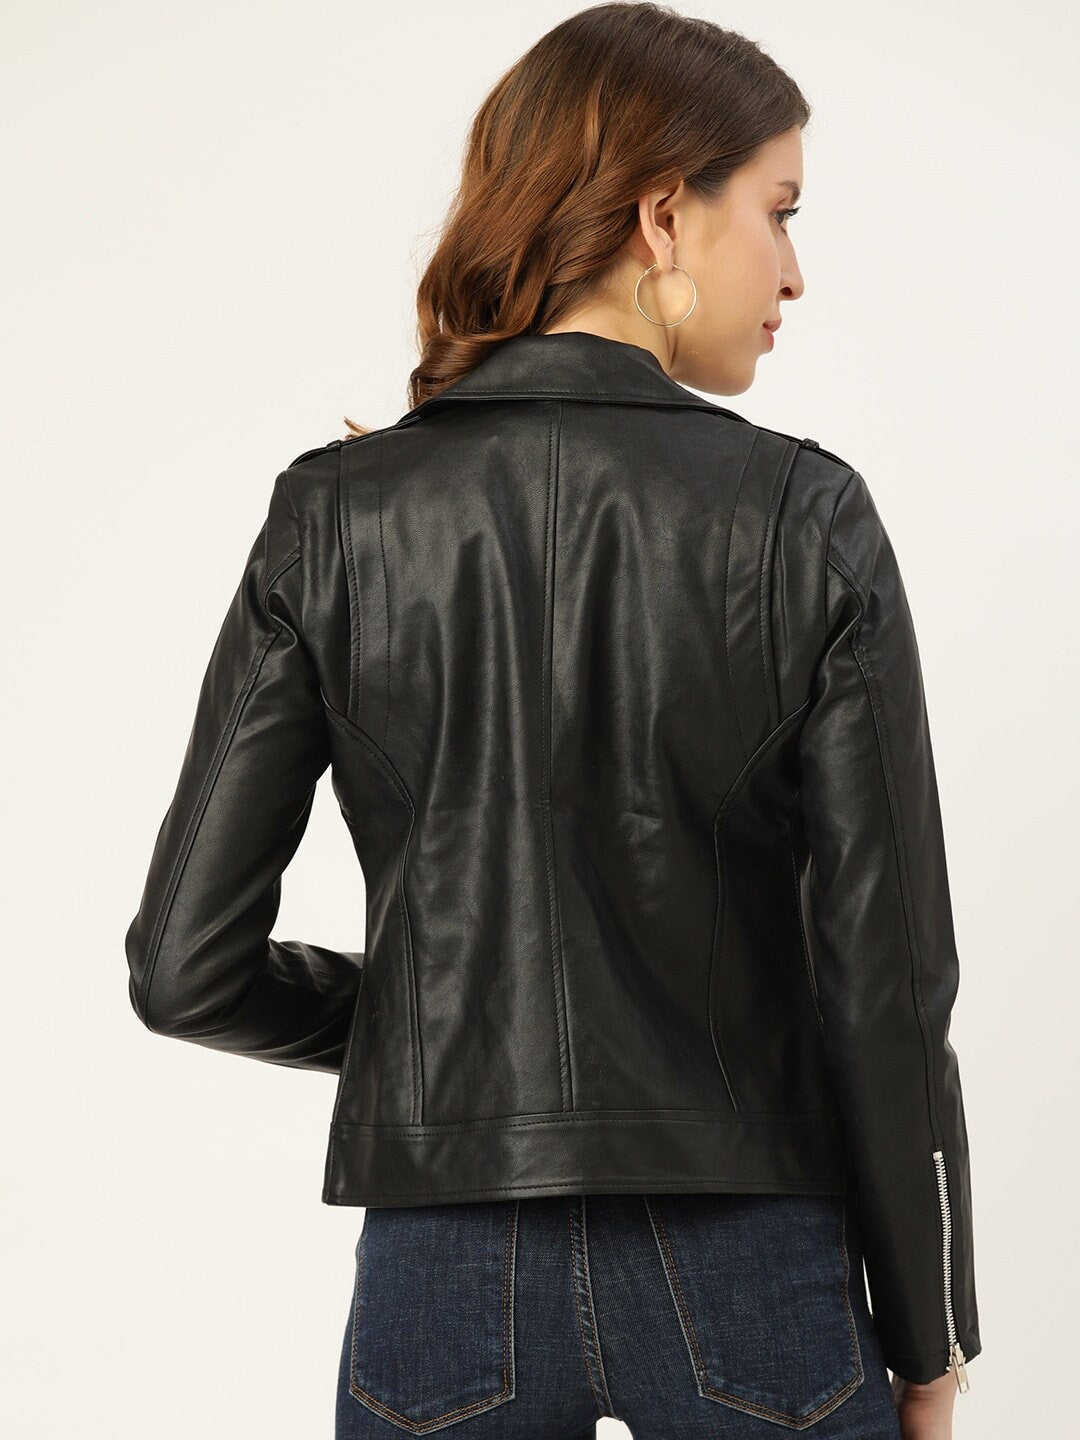 Women Black Asymmetric Closure Lambskin Leather Biker Jacket Leather Cropped Jacket Leather Coat Slim Fit Leather Jacket | Gift for Her